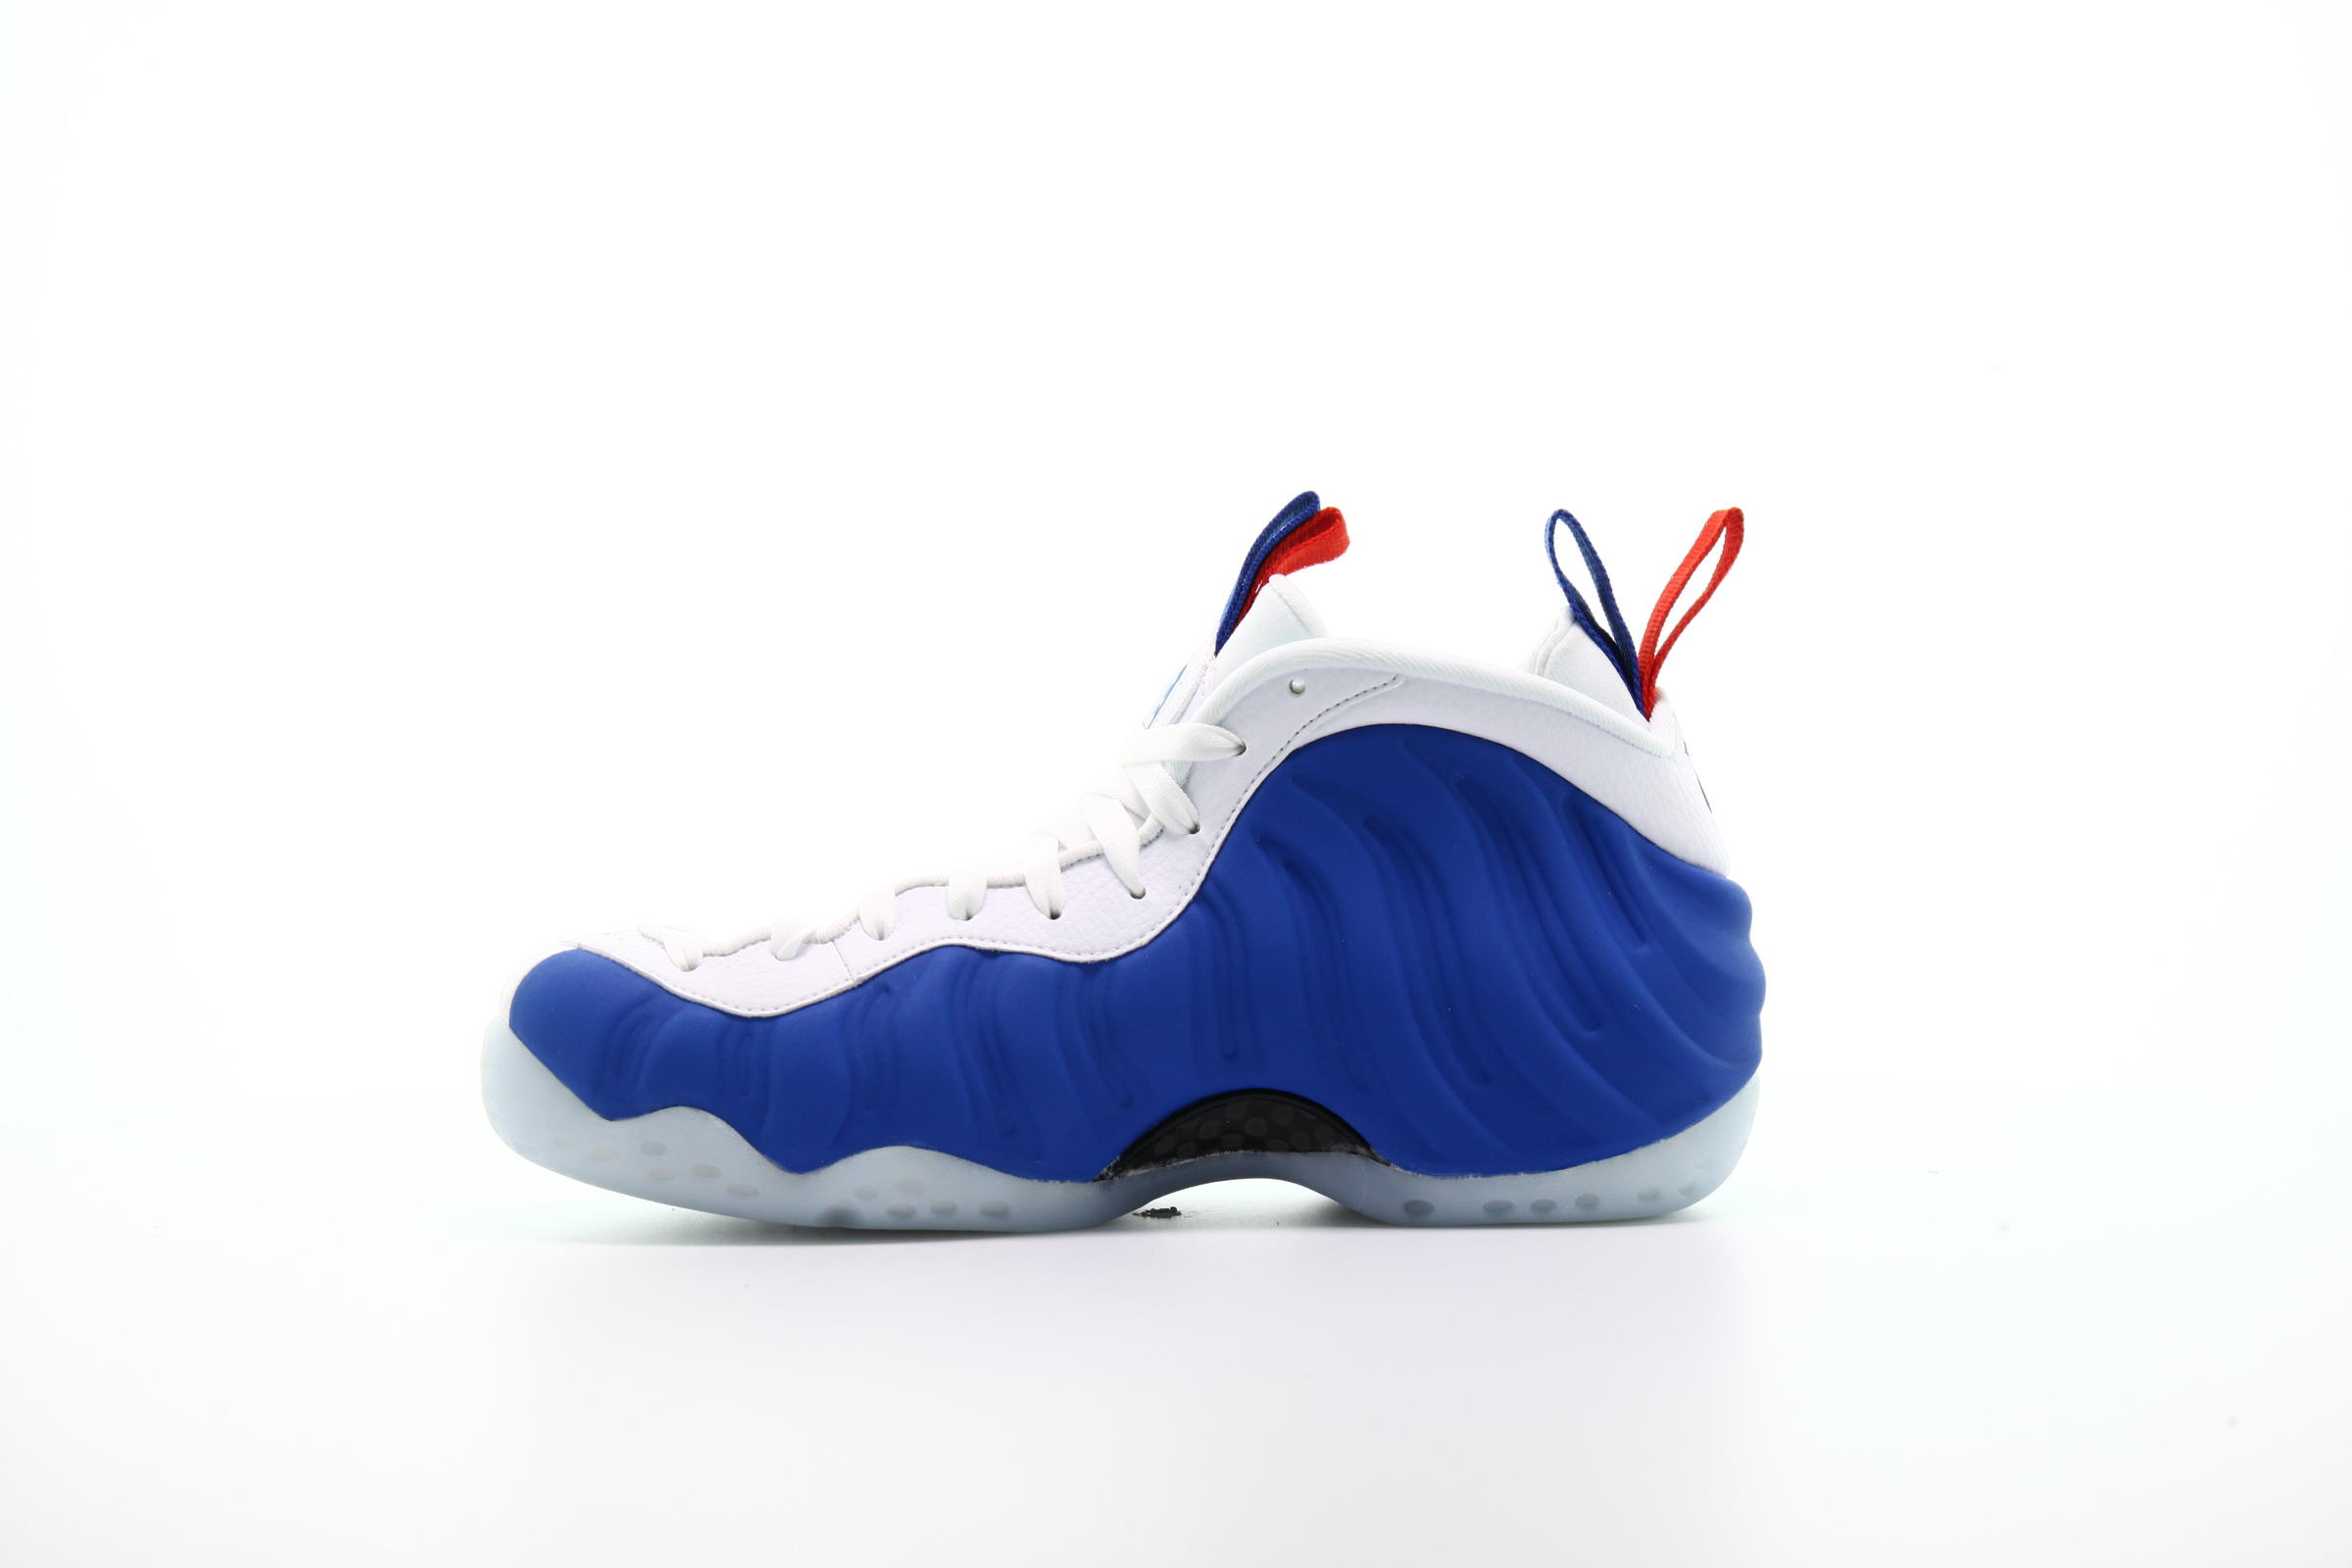 Nike WMNS Air Foamposite One "Gameroyal"